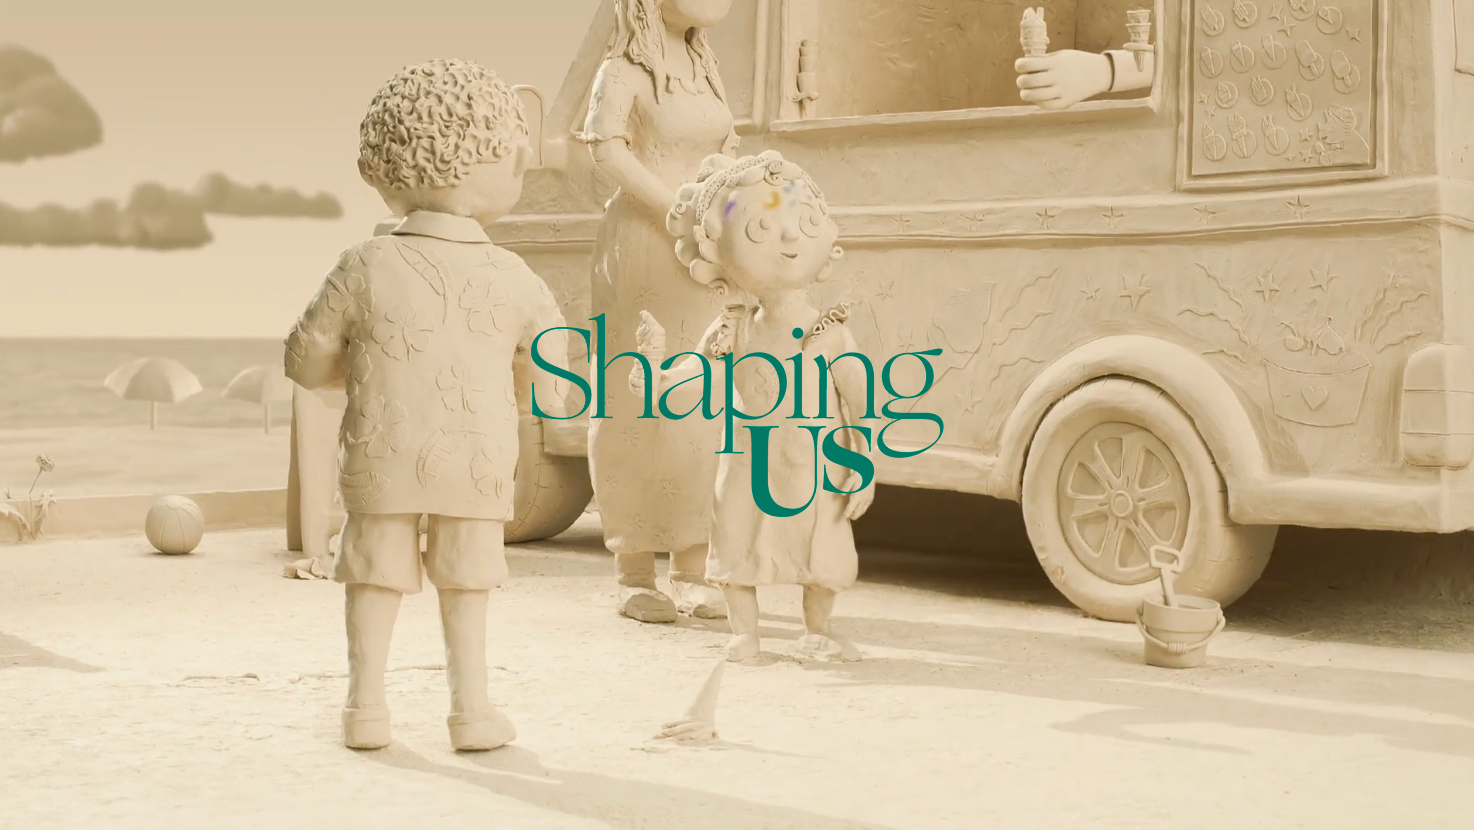 Shaping Us campaign image